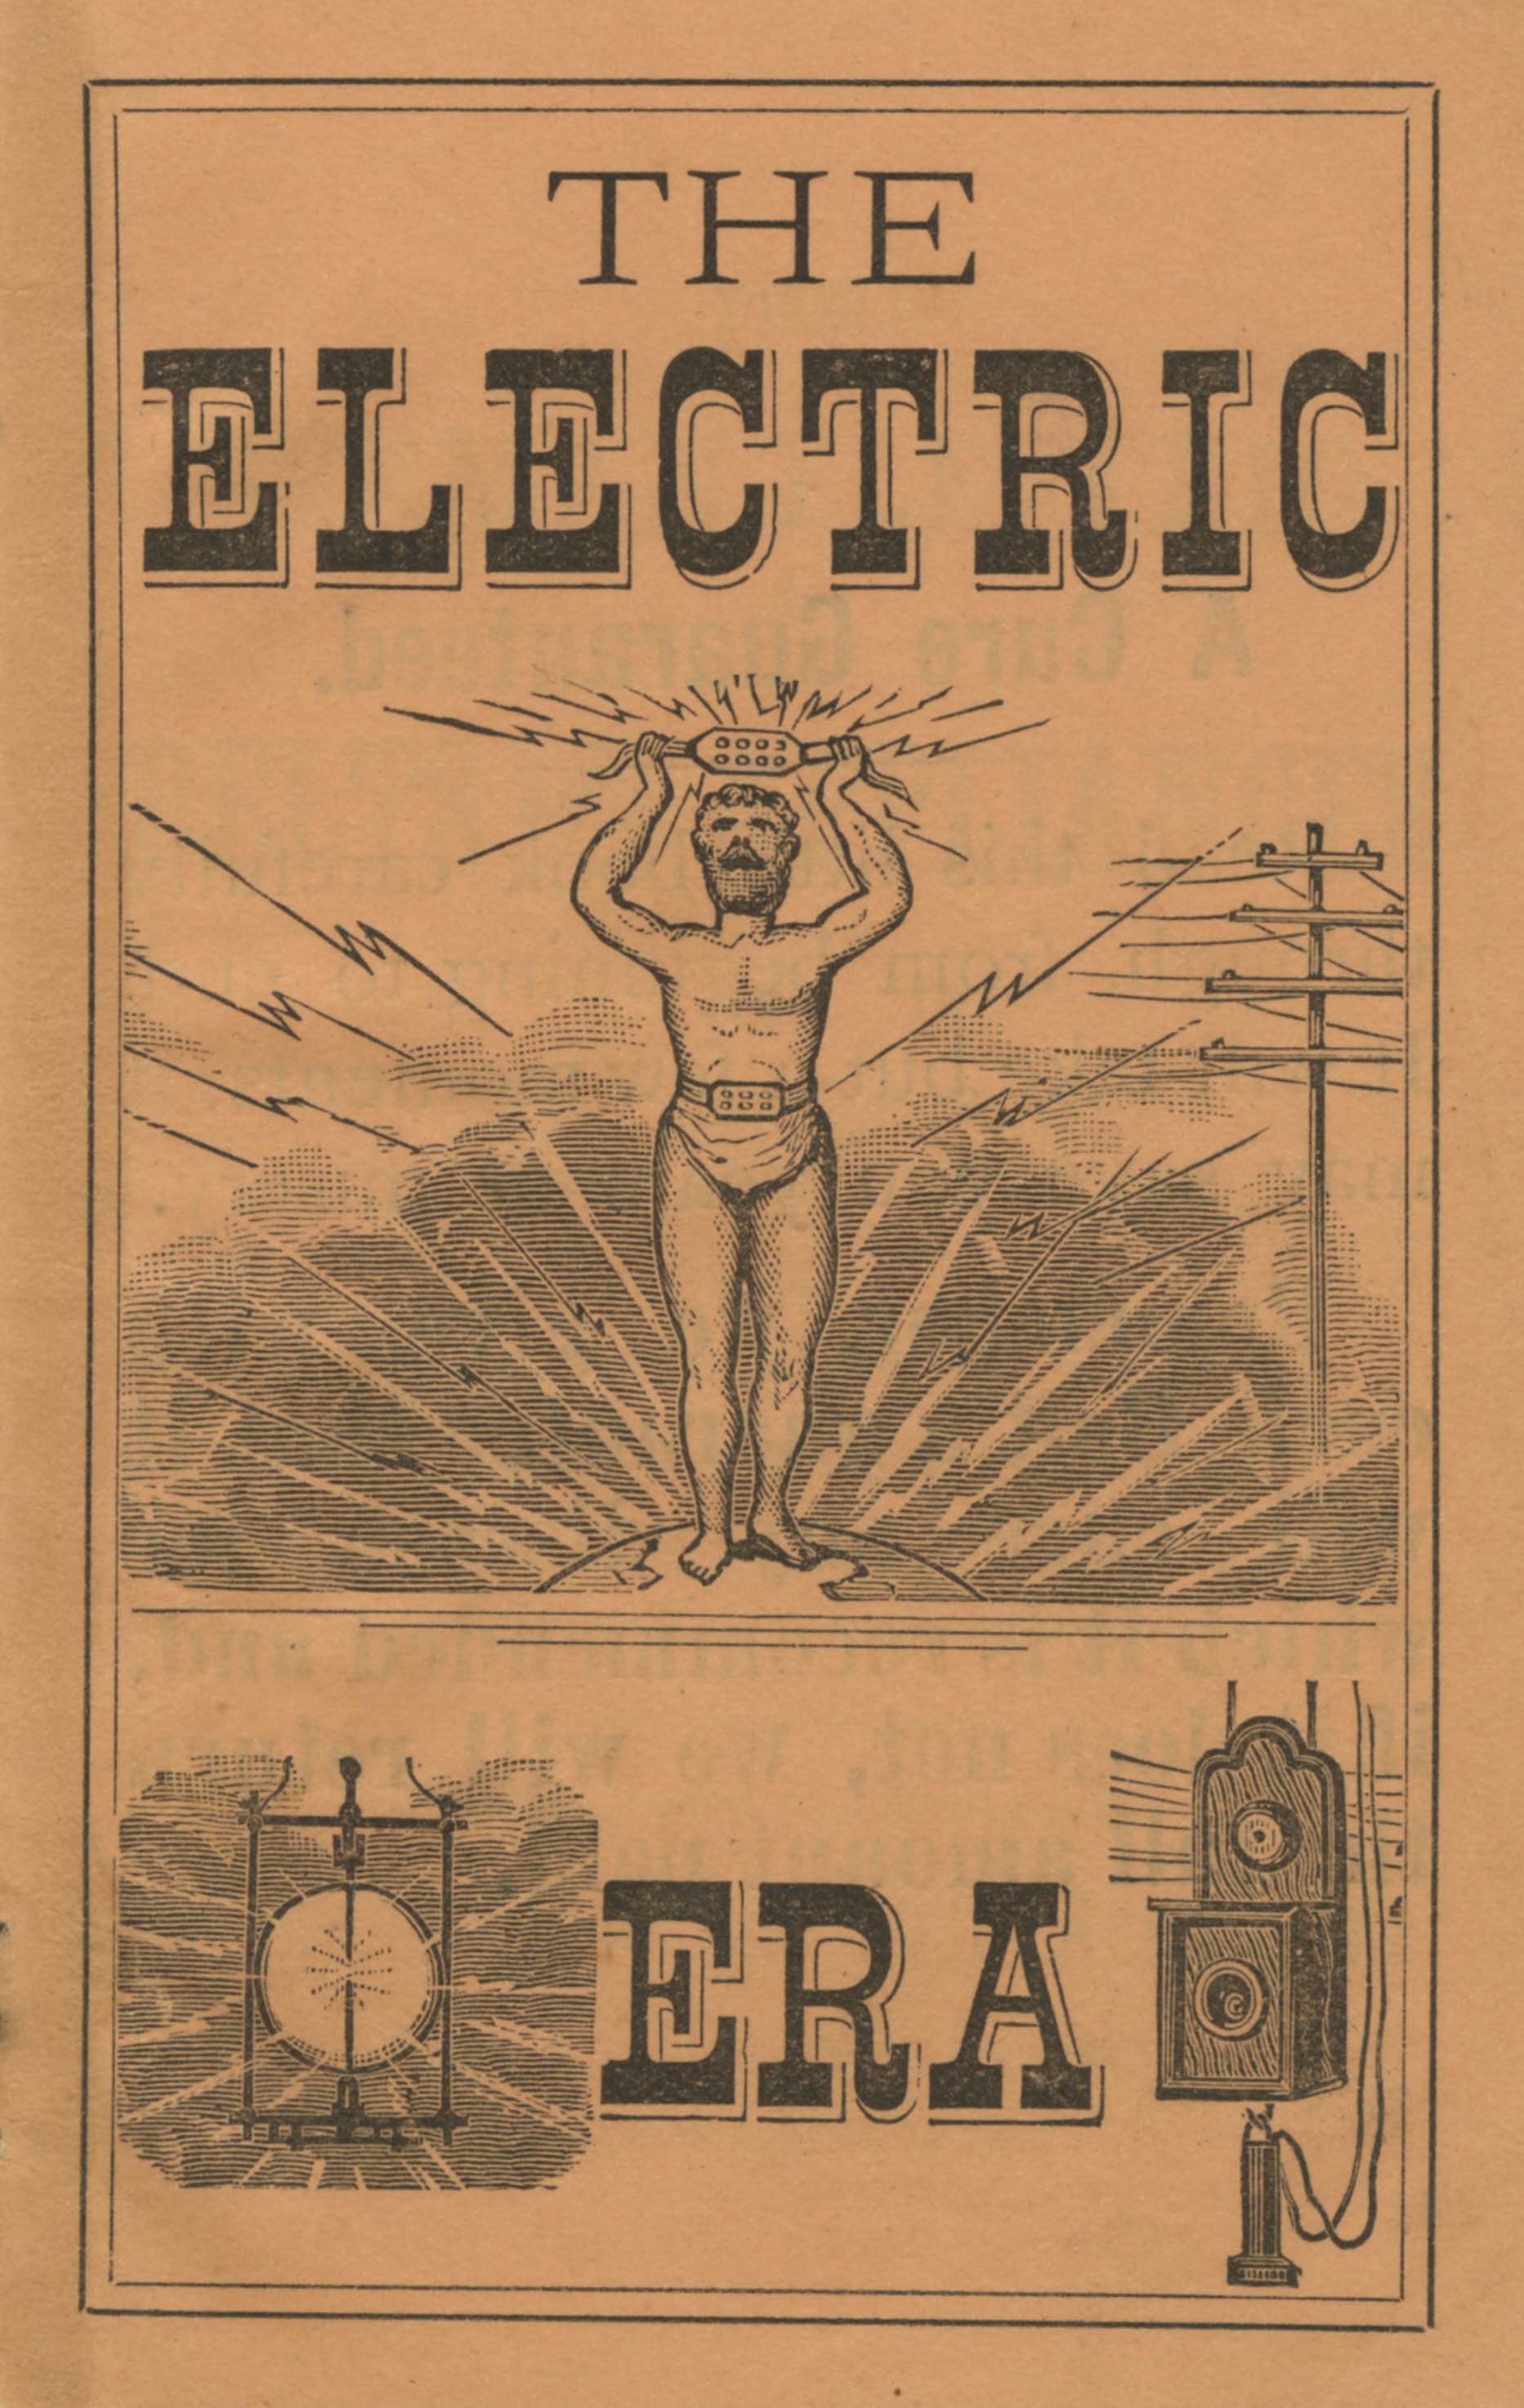 Advertisement of man harnessing electricity with bolts above his head